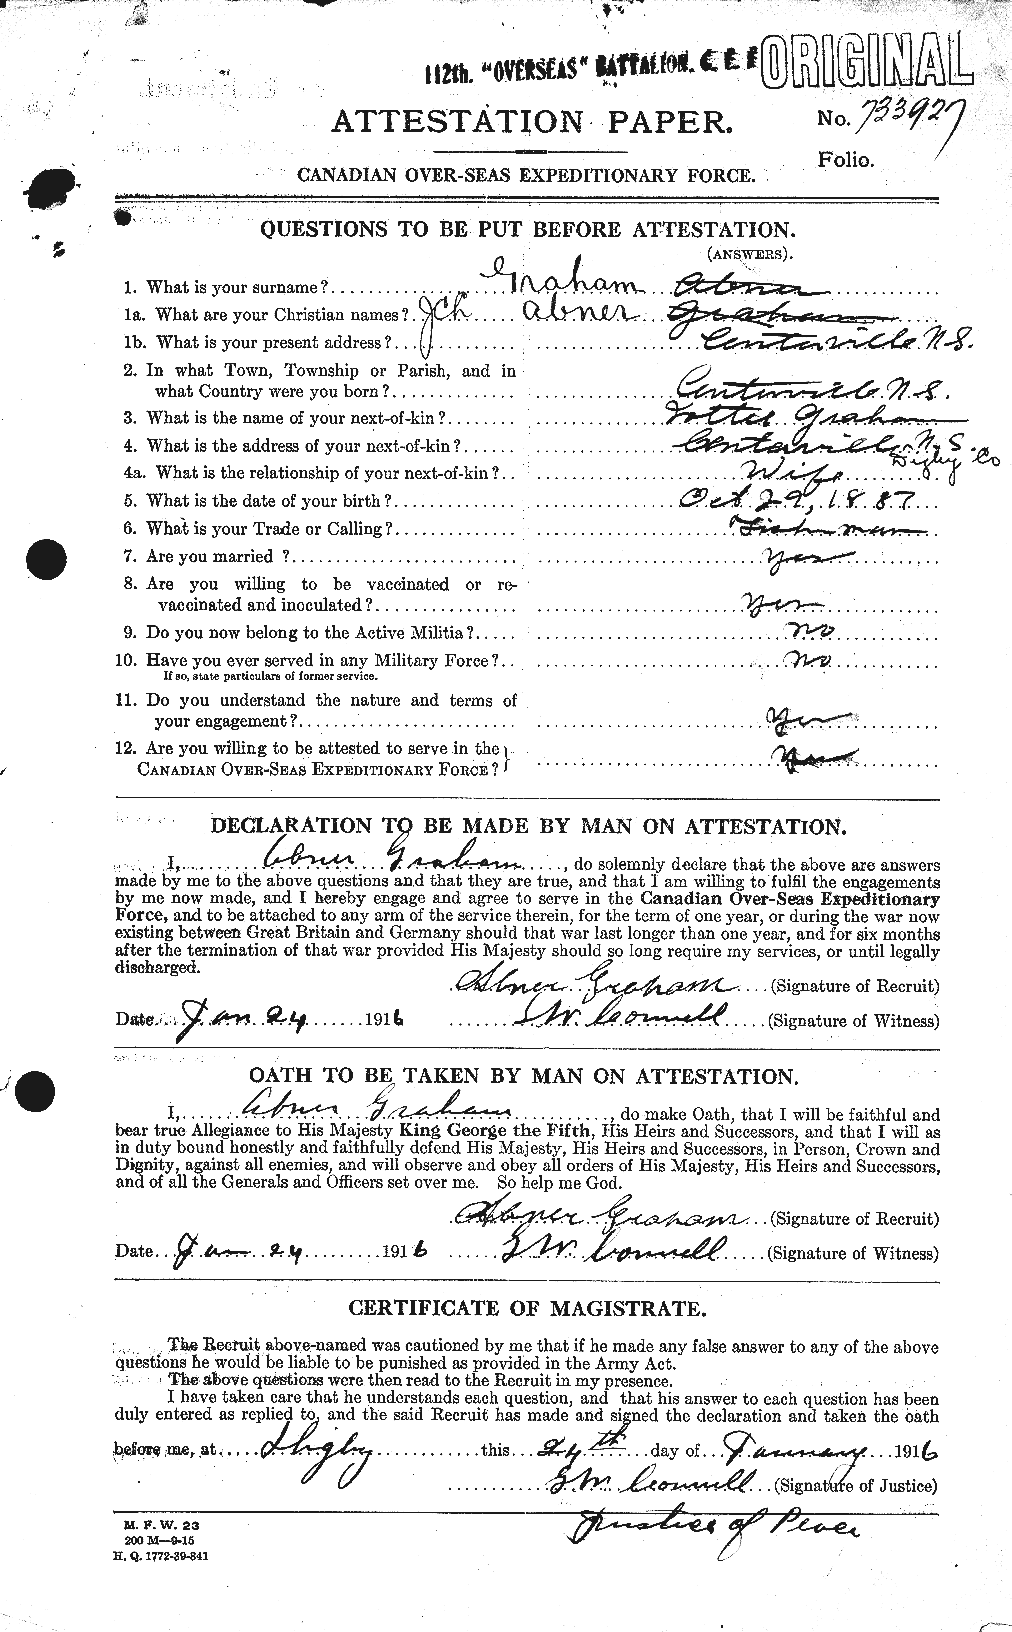 Personnel Records of the First World War - CEF 359559a